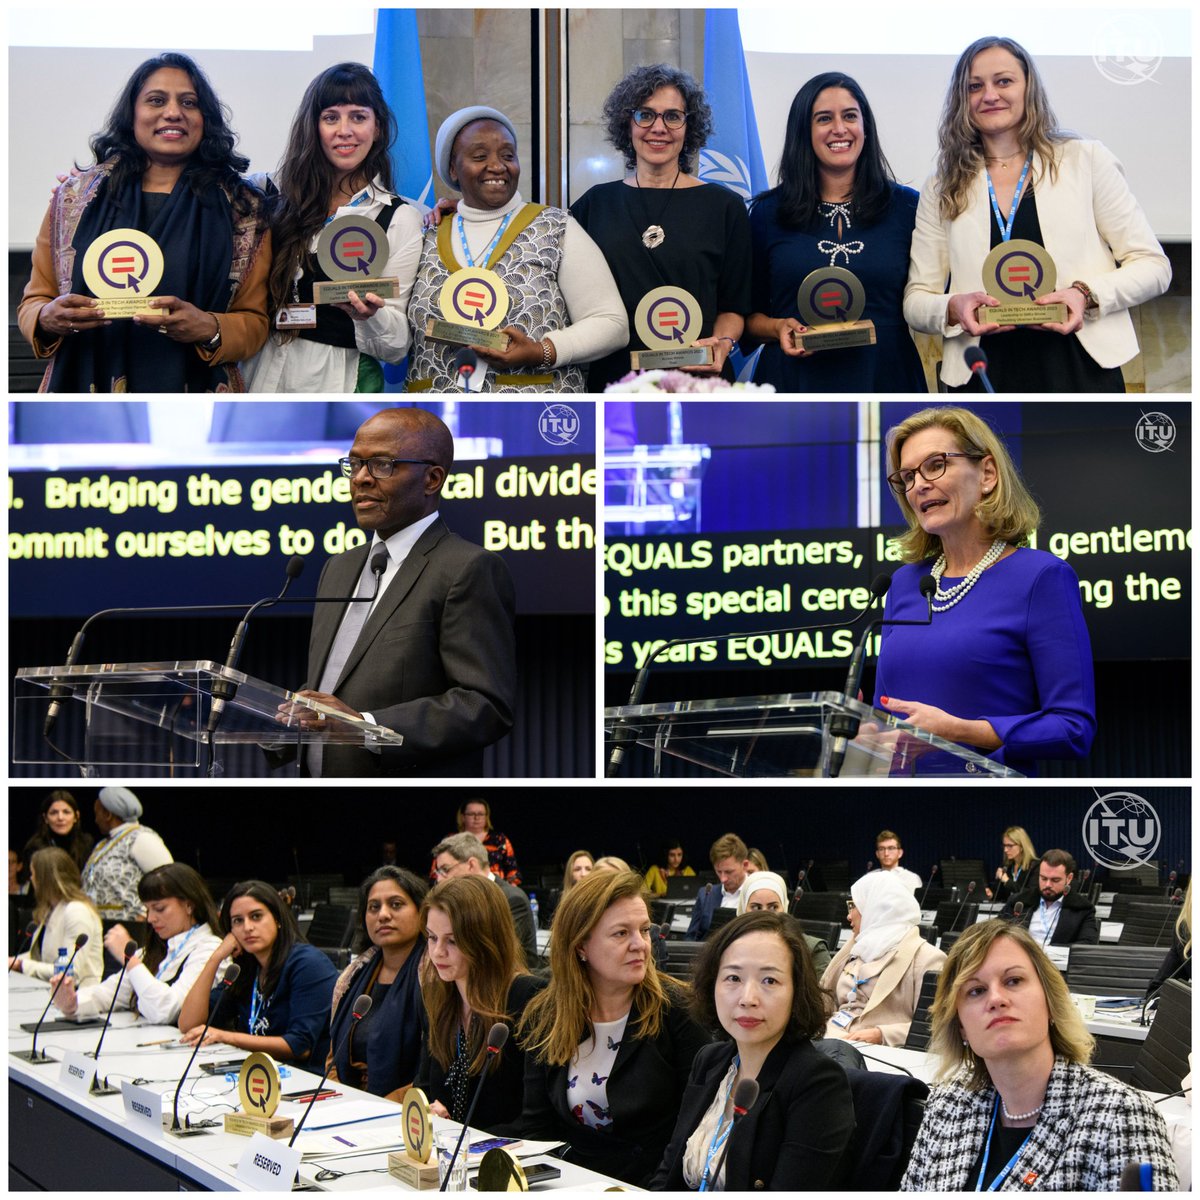 Congratulations to the 2023 #EQUALSinTech Awards winners – you are impacting the world! You are all champions. Together, let us mainstream gender in the #digital world, helping girls & women gain equal #Internet access, #DigitalSkills and opportunities around the world.